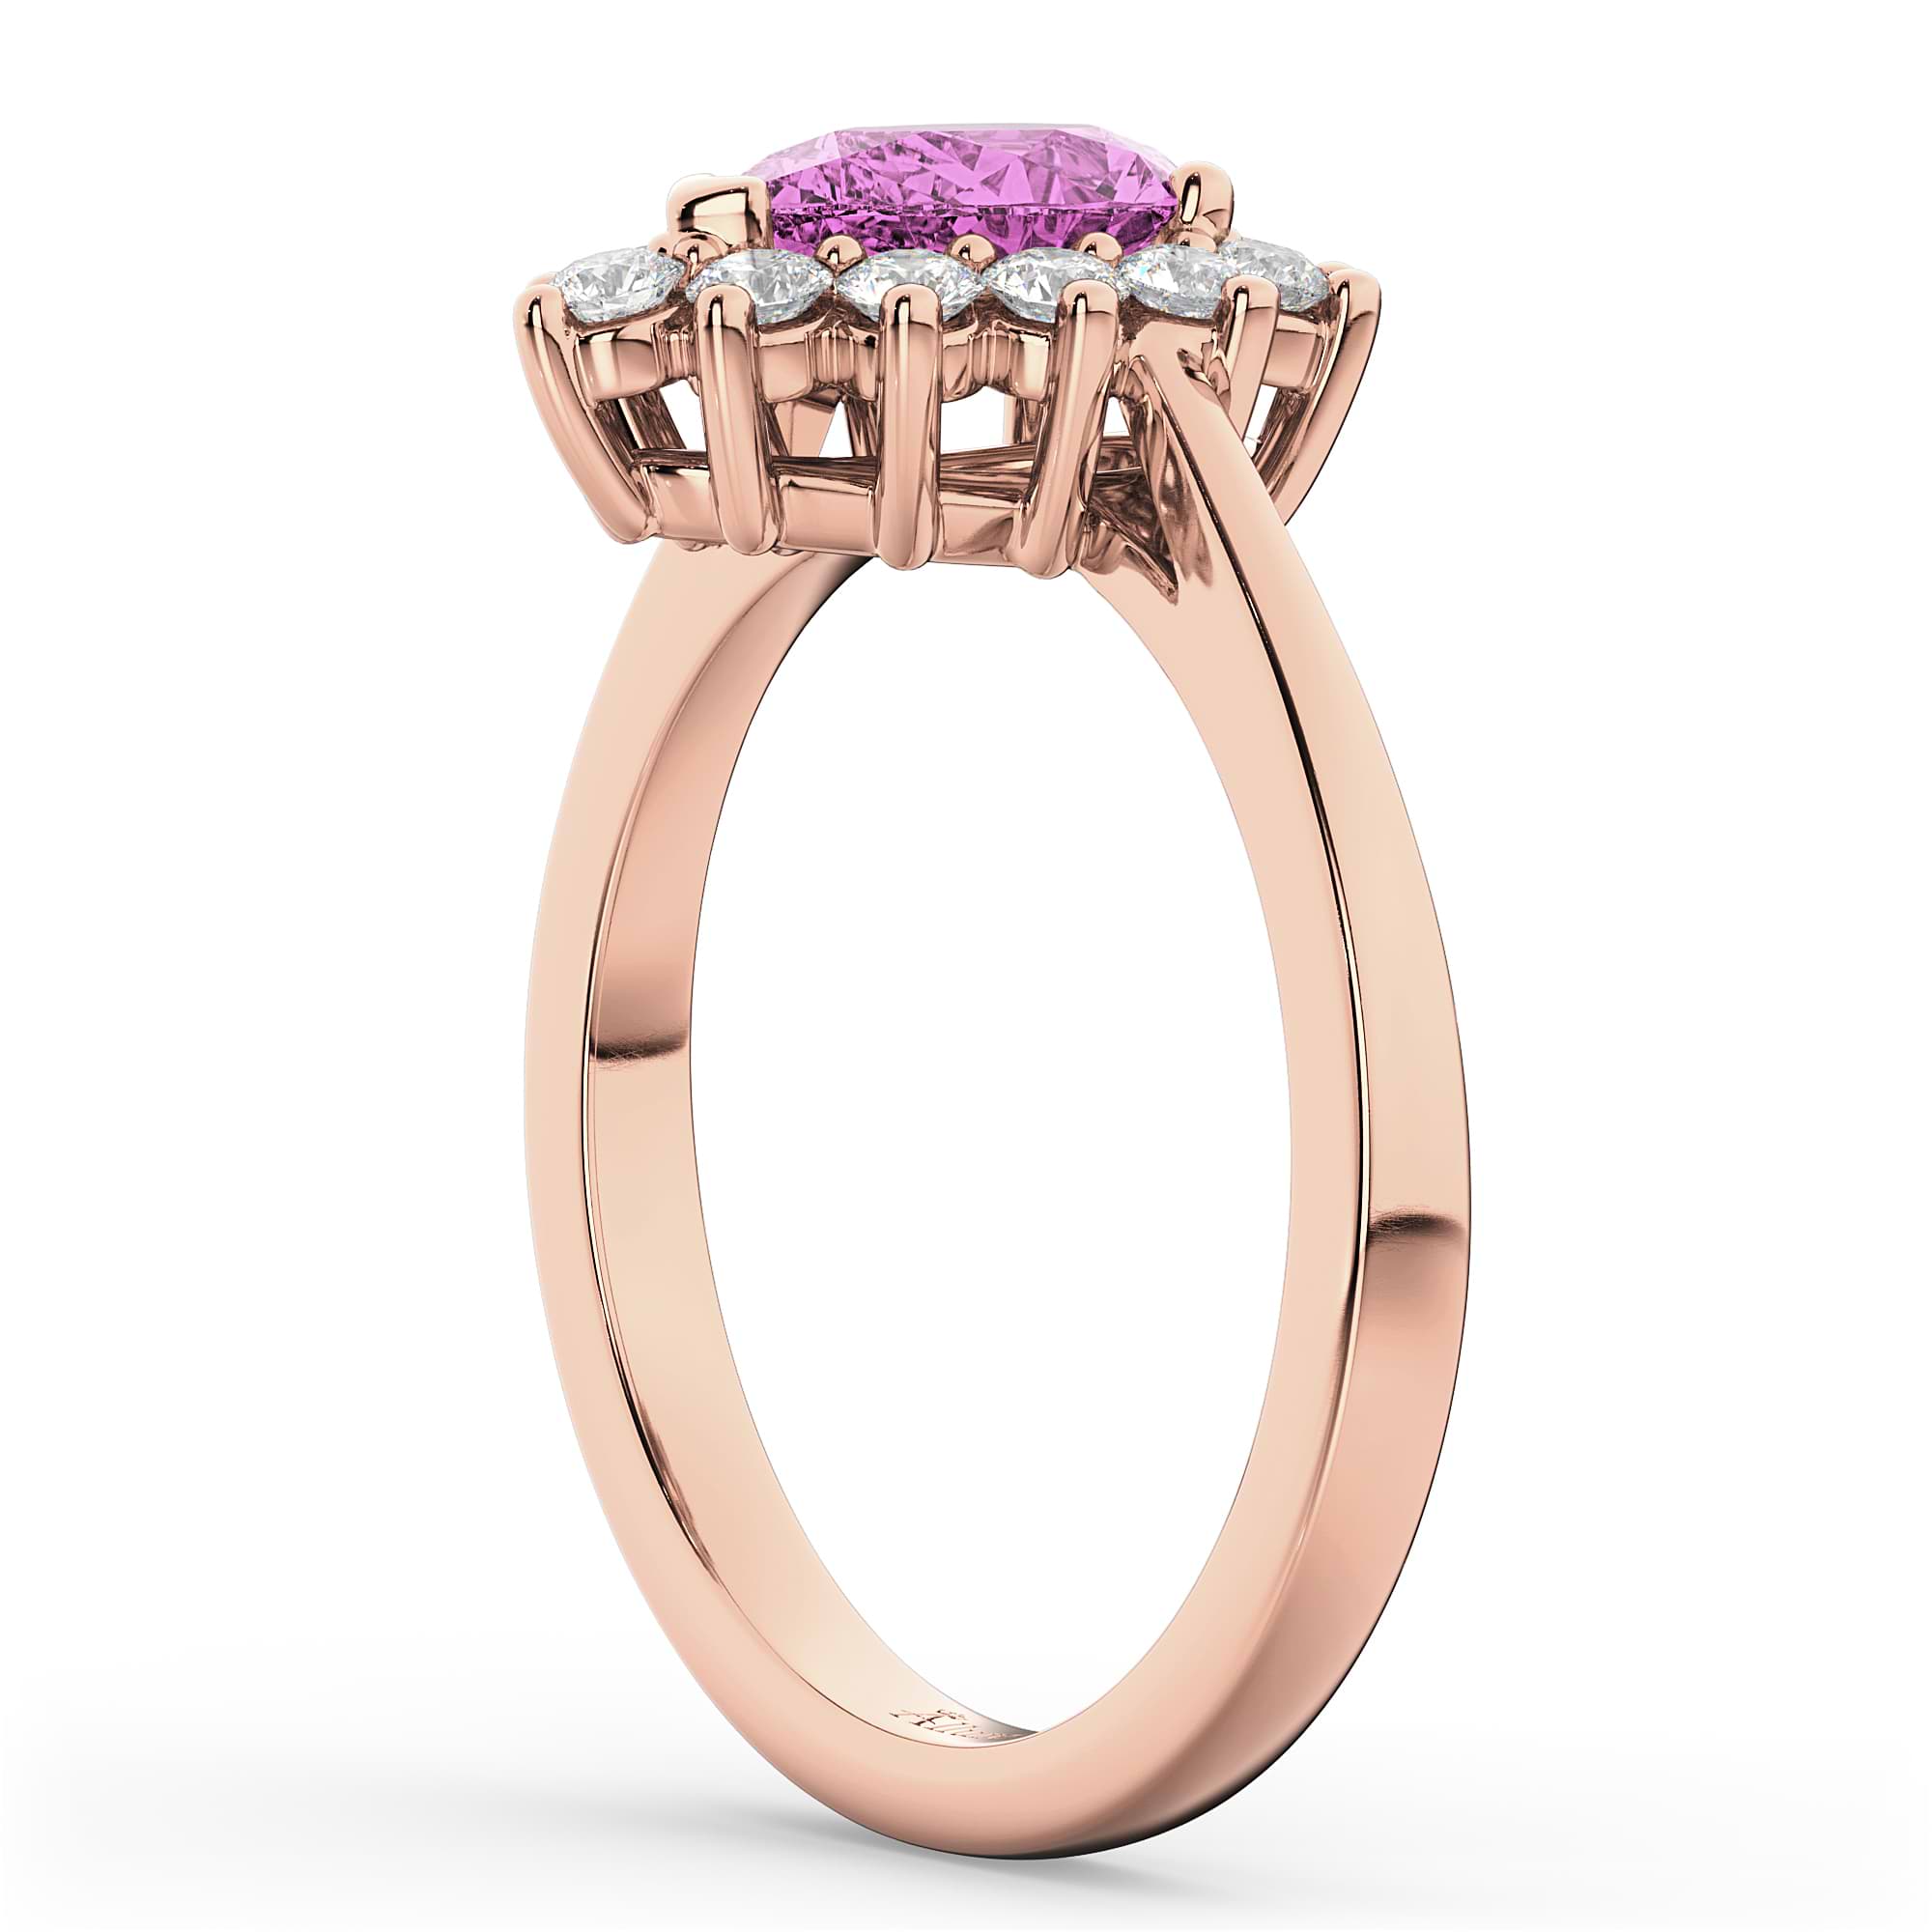 Halo Pink Sapphire & Diamond Floral Pear Shaped Fashion Ring 14k Rose Gold (1.27ct)